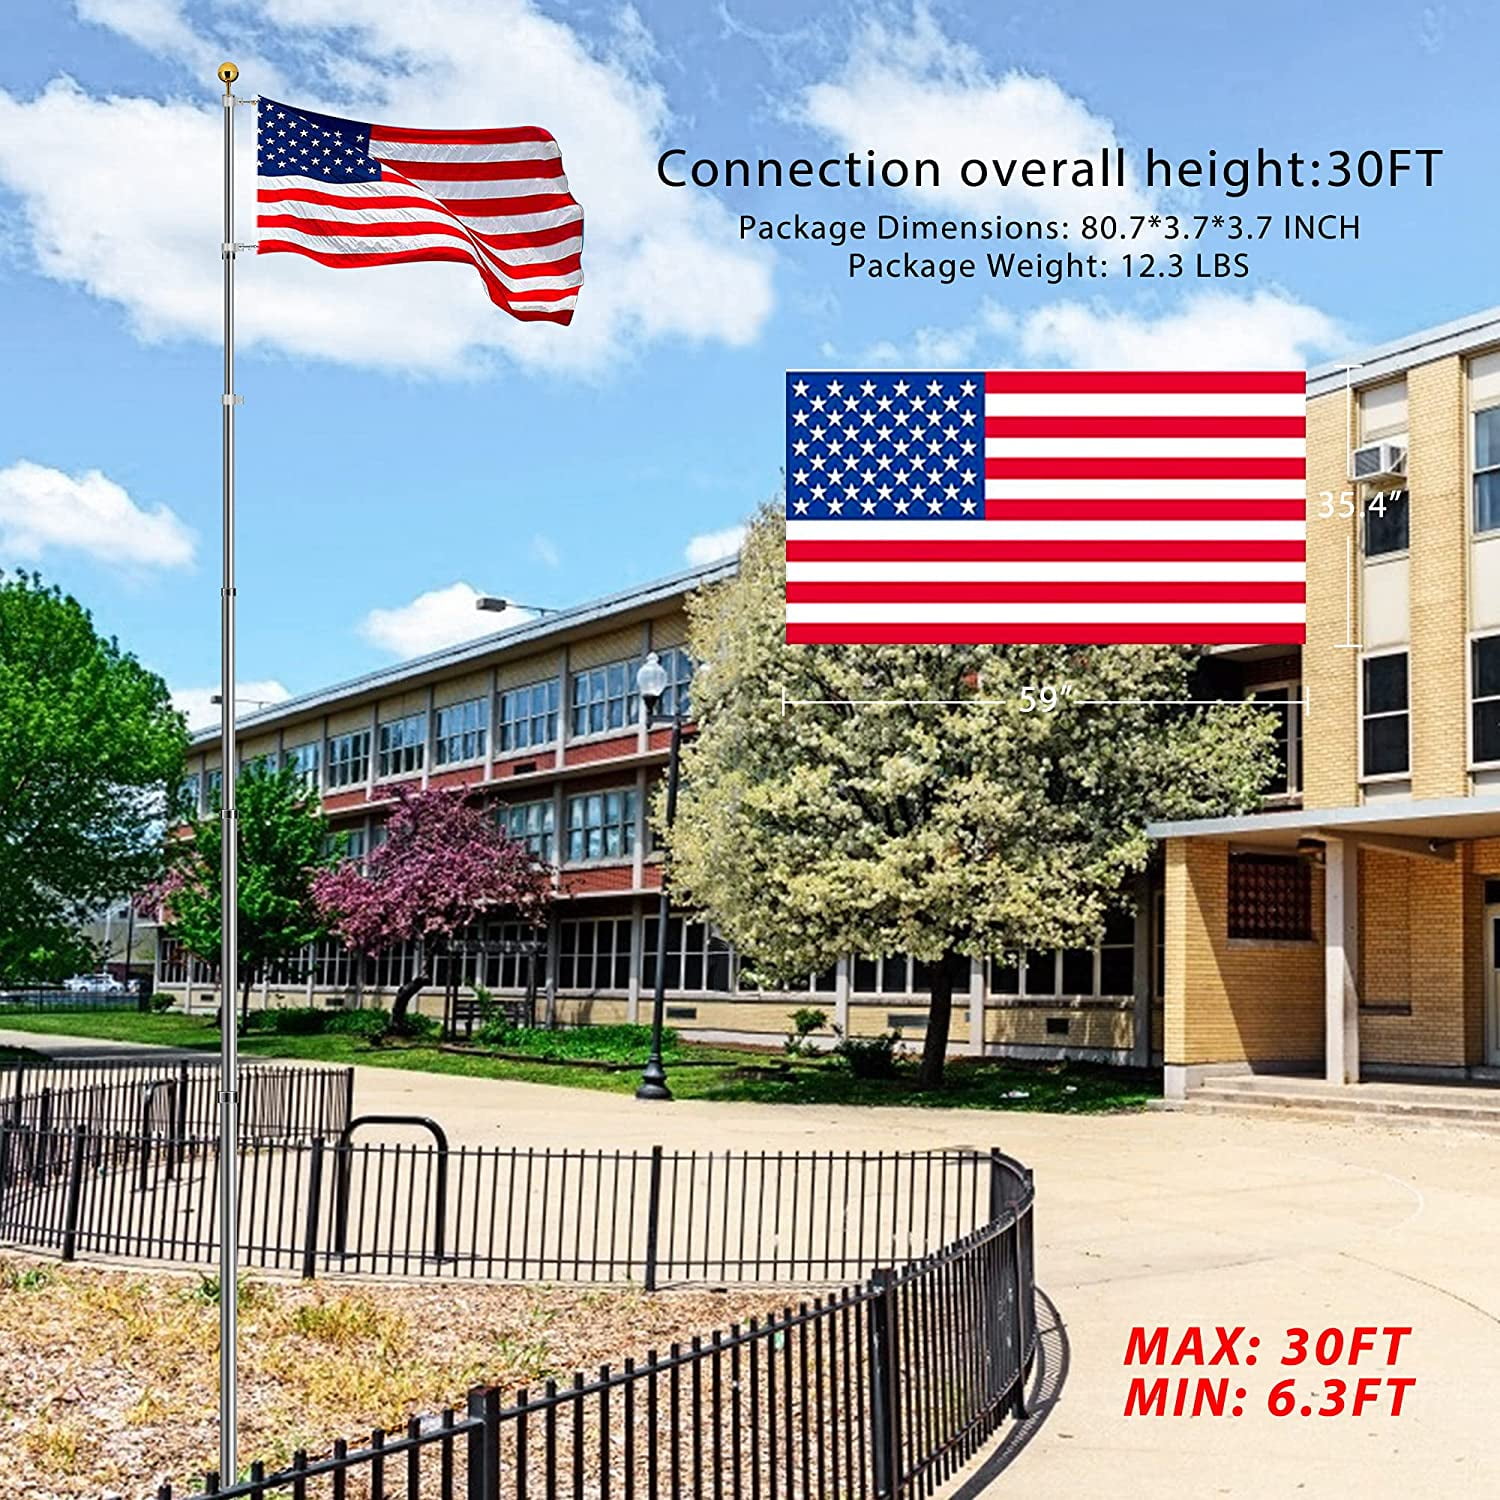 Klvied 20FT Telescopic Flag Pole Tangle Free Flagpole Kit Fly 2 Flags Residential Heavy Duty Extra Thick Aluminum Flag Pole with 3x5 America Flag Golden Ball Top for Commercial Outdoor Use 